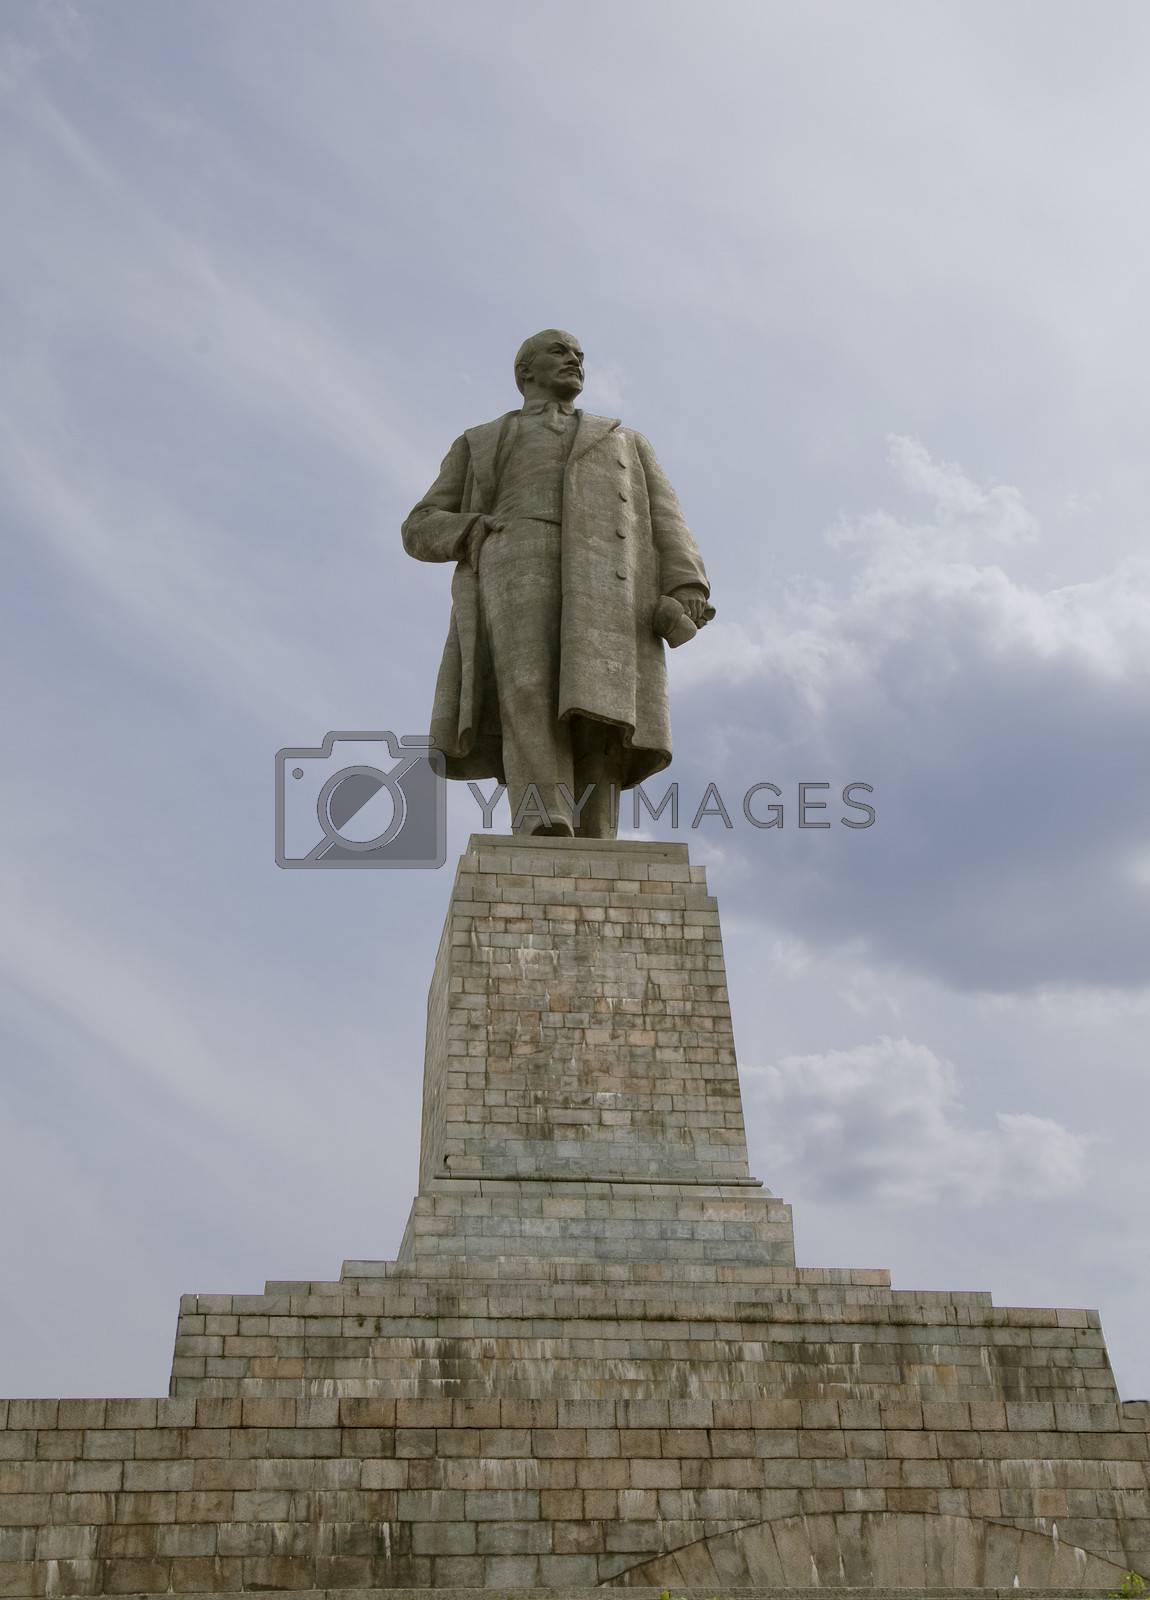 Royalty free image of The biggest Lenin's monument in the world by Goodday